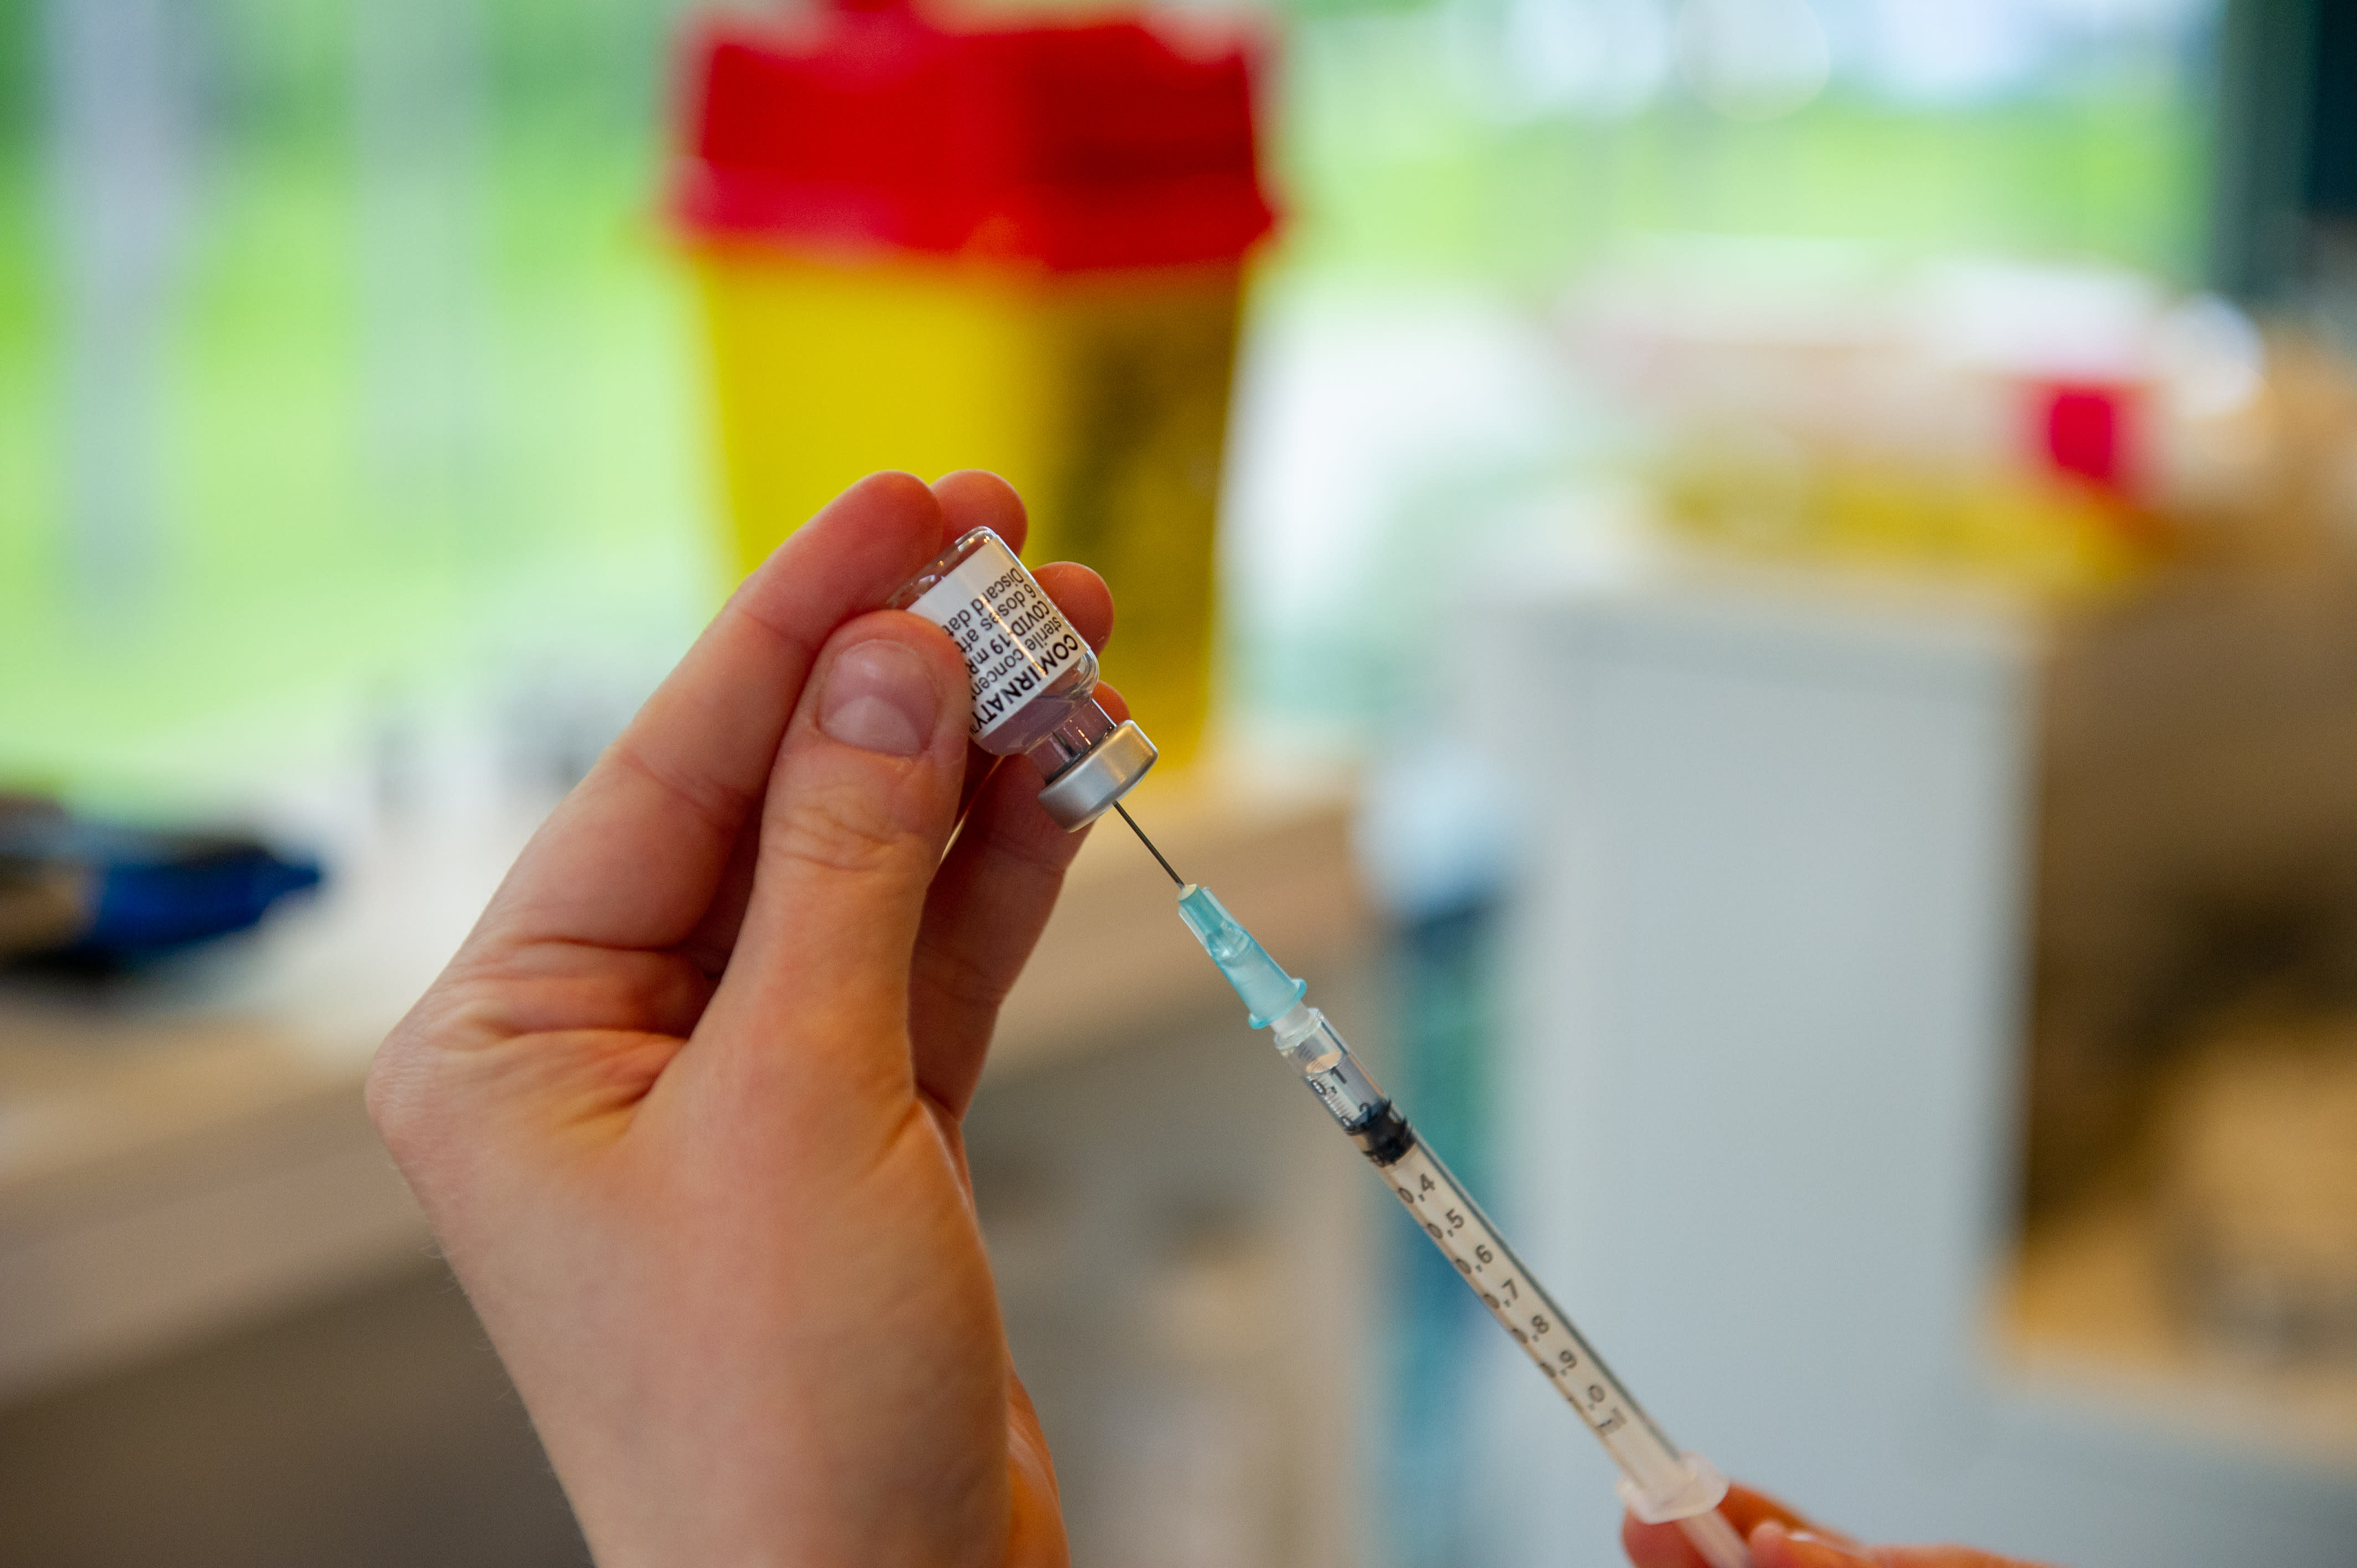 Use of two effective and safe Covid vaccines, preliminary research results